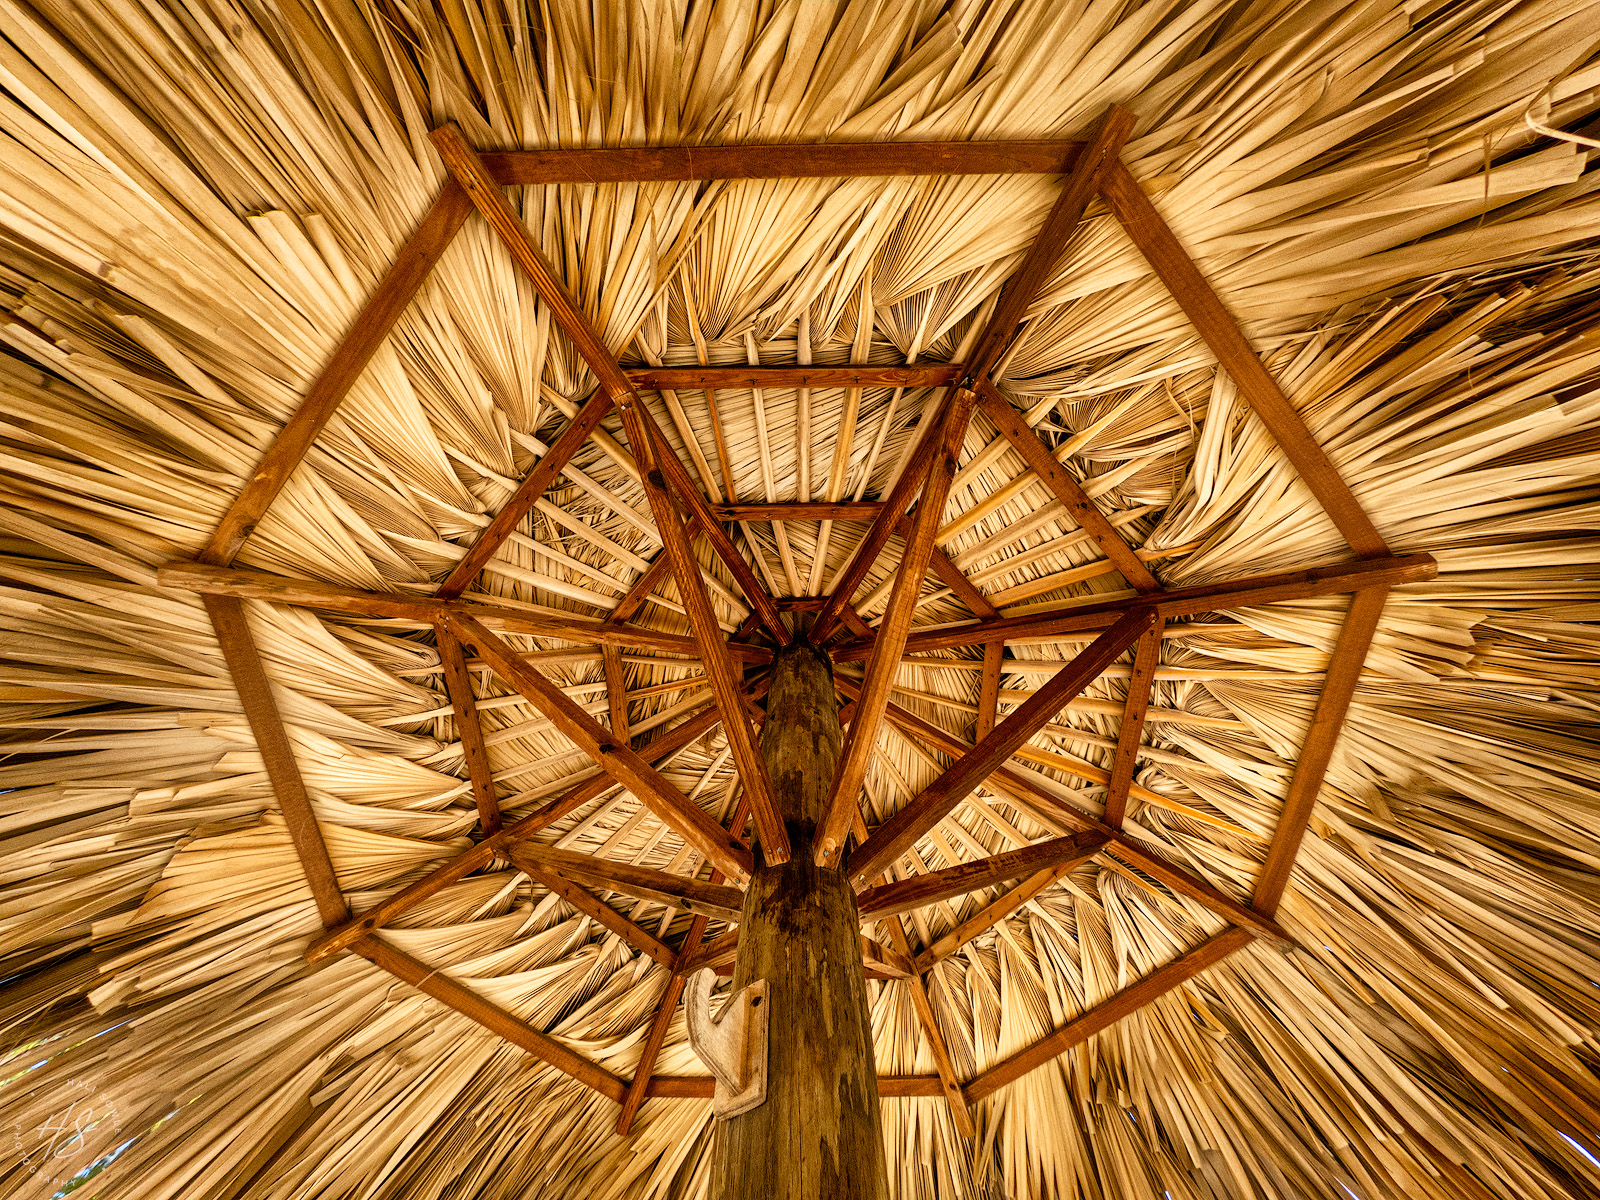 2021_09_SandalsSouthCoast_GoPro-10331-Edit1600.jpg - Looking up at the intricate underside of a beach umbrella/palapa